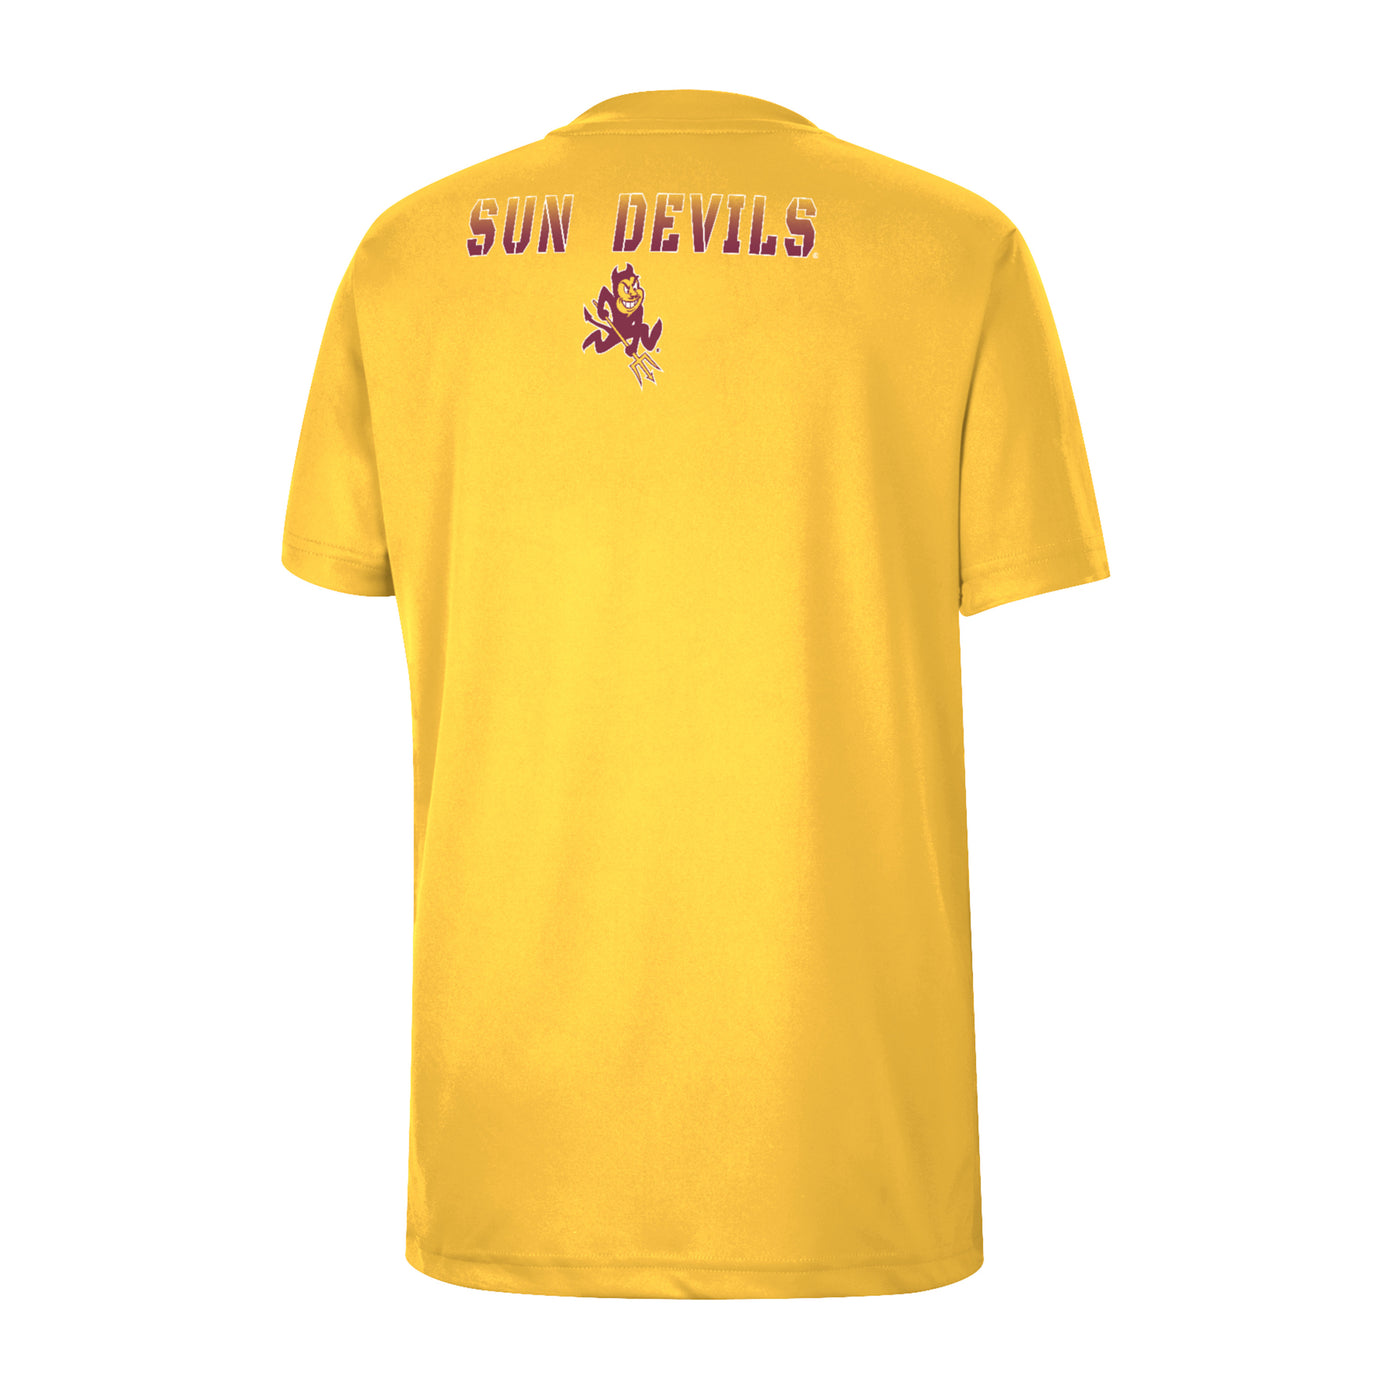 Back view of ASU gold youth tee with 